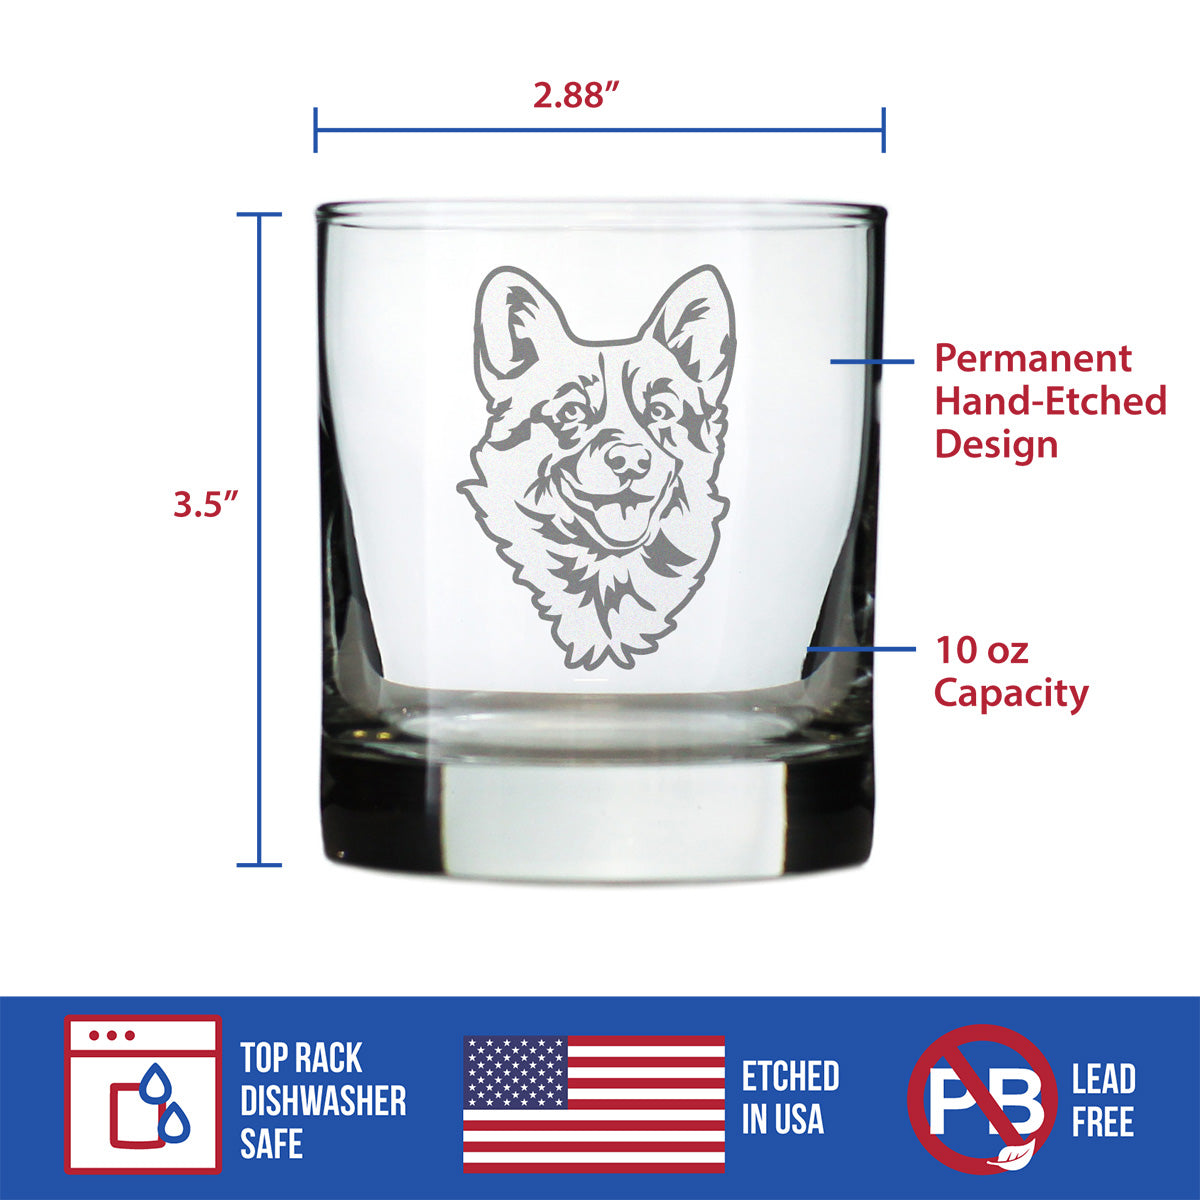 Corgi Face Whiskey Rocks Glass - Unique Dog Themed Decor and Gifts for Moms &amp; Dads of Welsh Corgies - 10.25 Oz